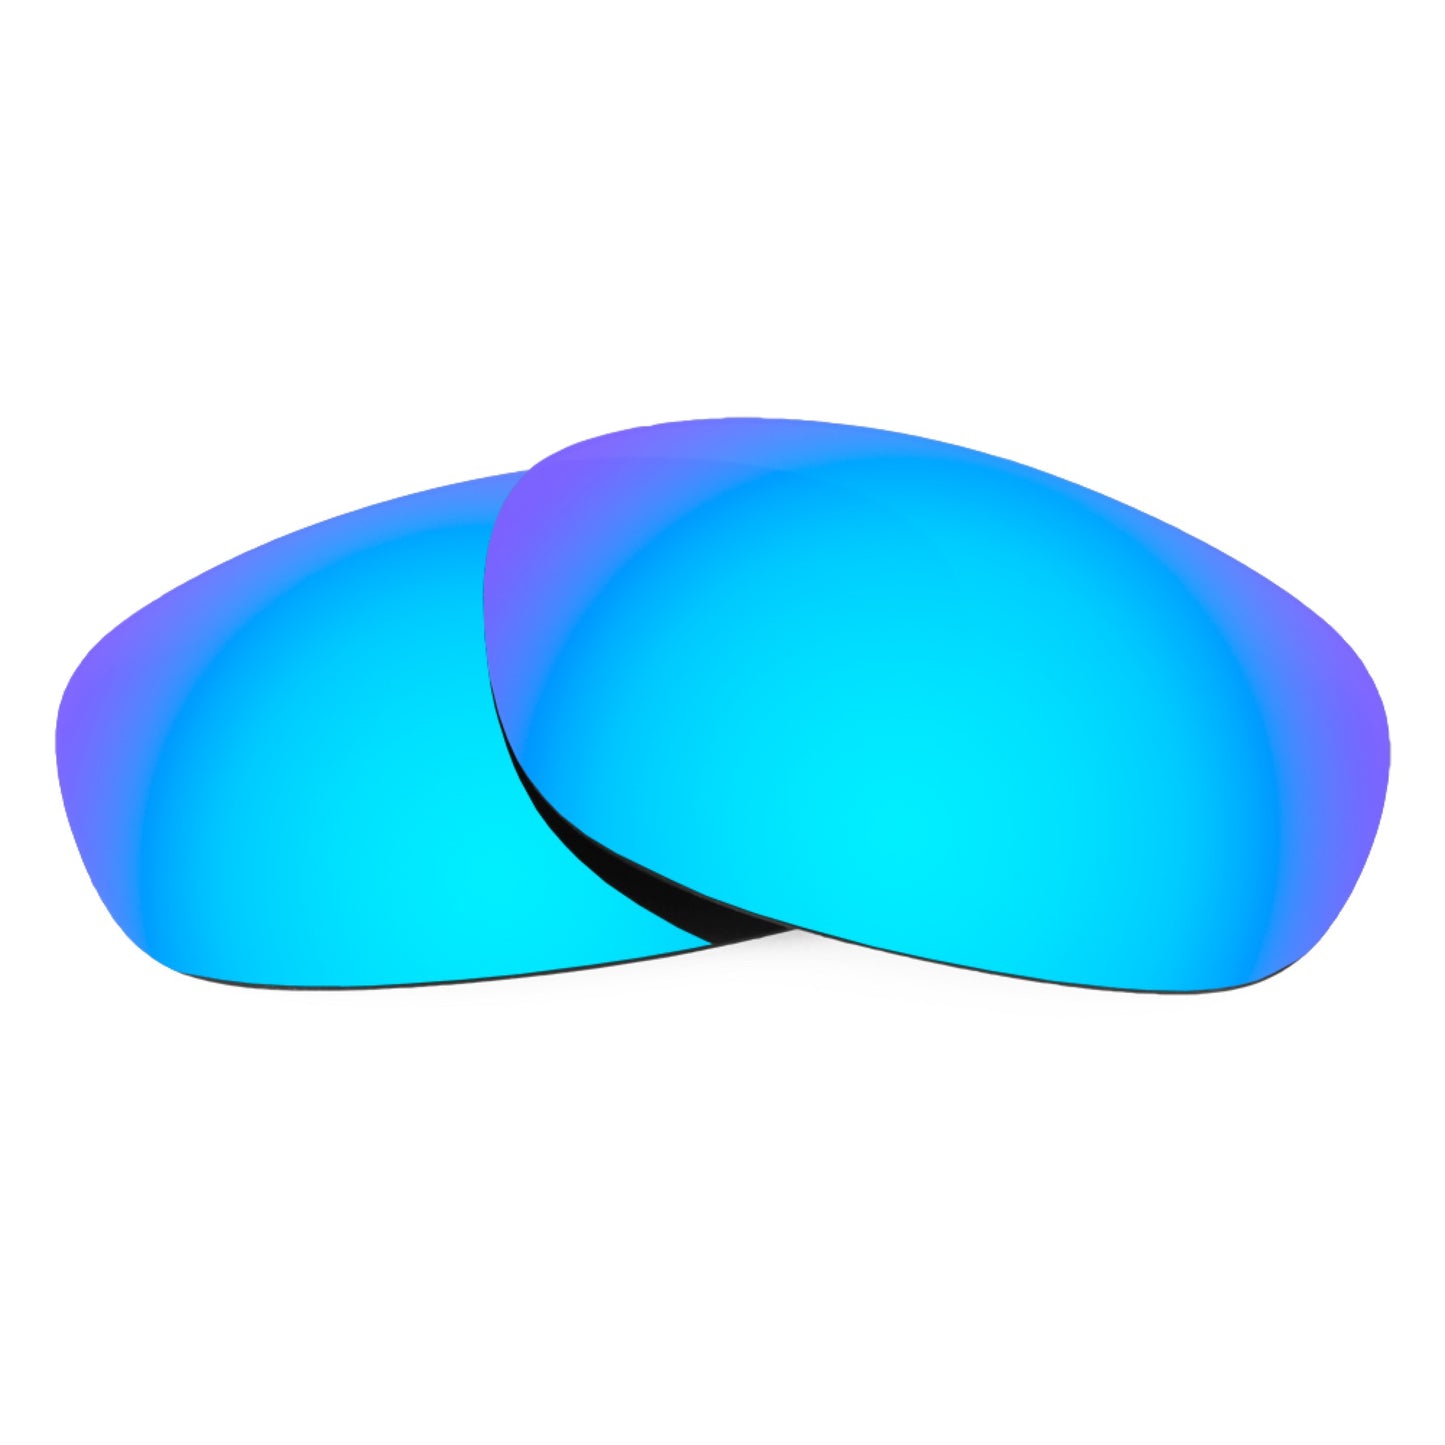 Revant replacement lenses for Ray-Ban Sleek RB3162 52mm Non-Polarized Ice Blue